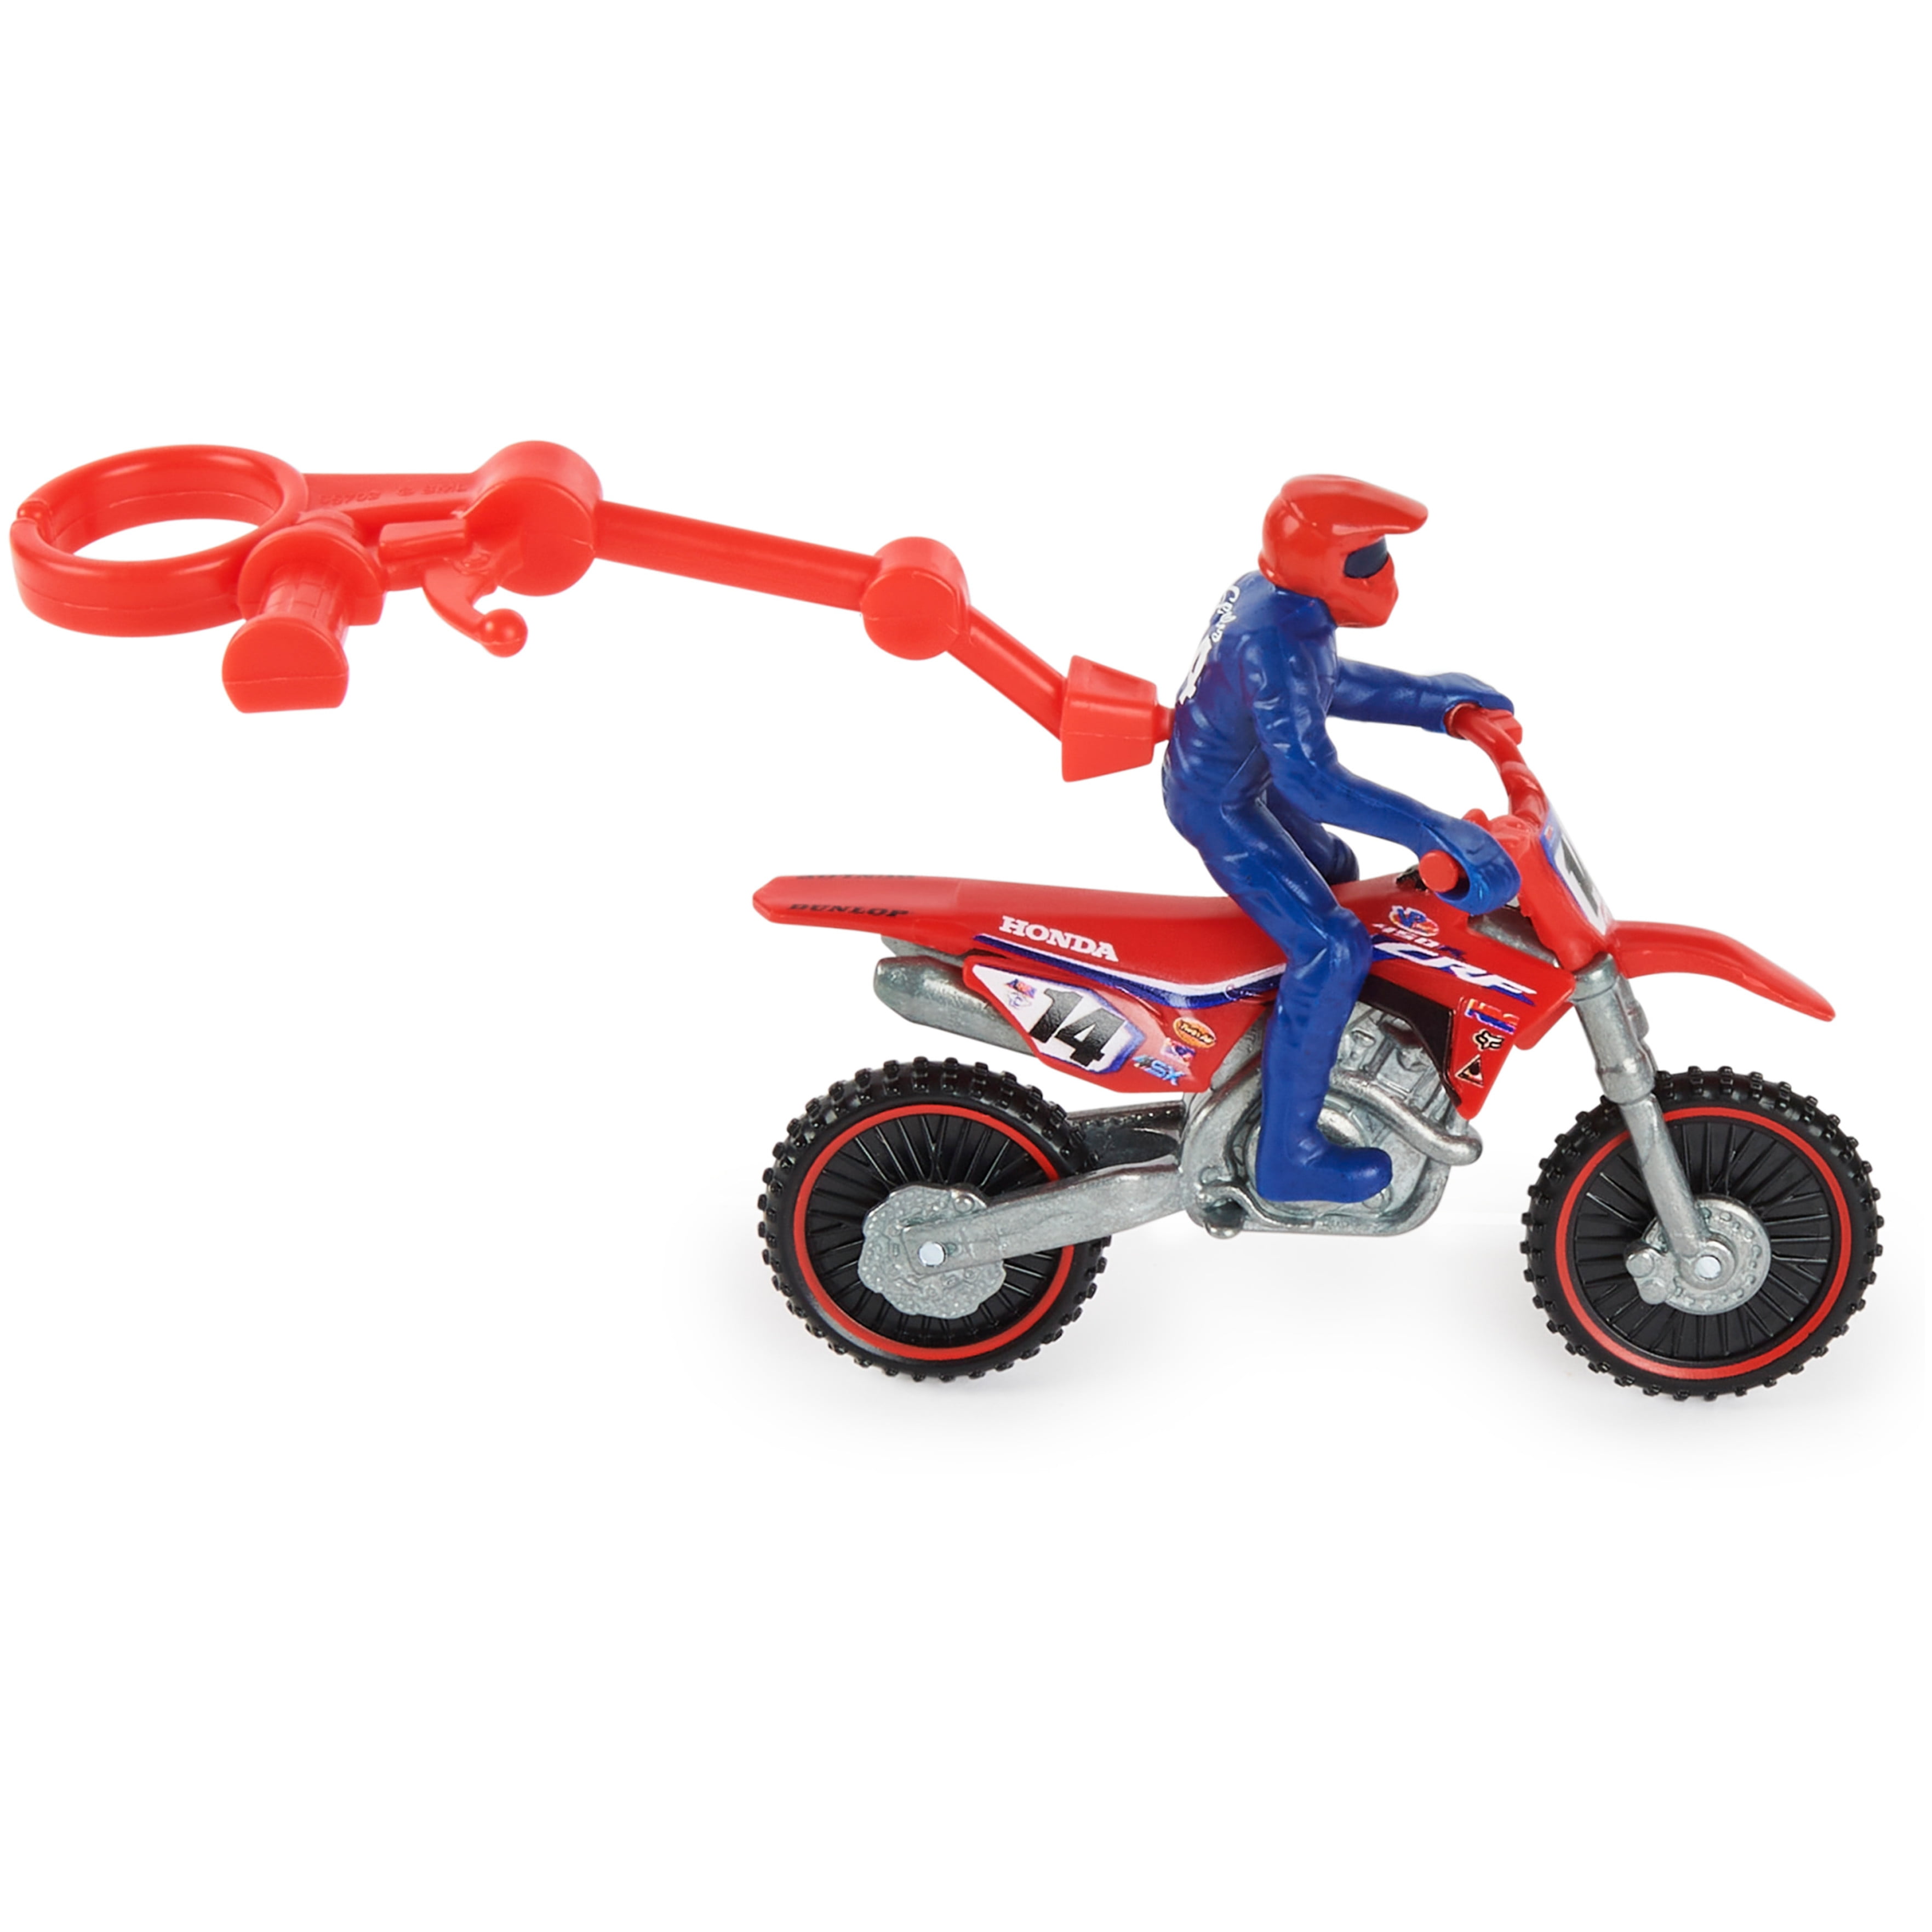 Supercross, Authentic 5-Pack of 1:24 Scale Die-Cast Motorcycles with Rider  Figure, Toy Moto Bike for Kids and Collectors Ages 3 and up, Small